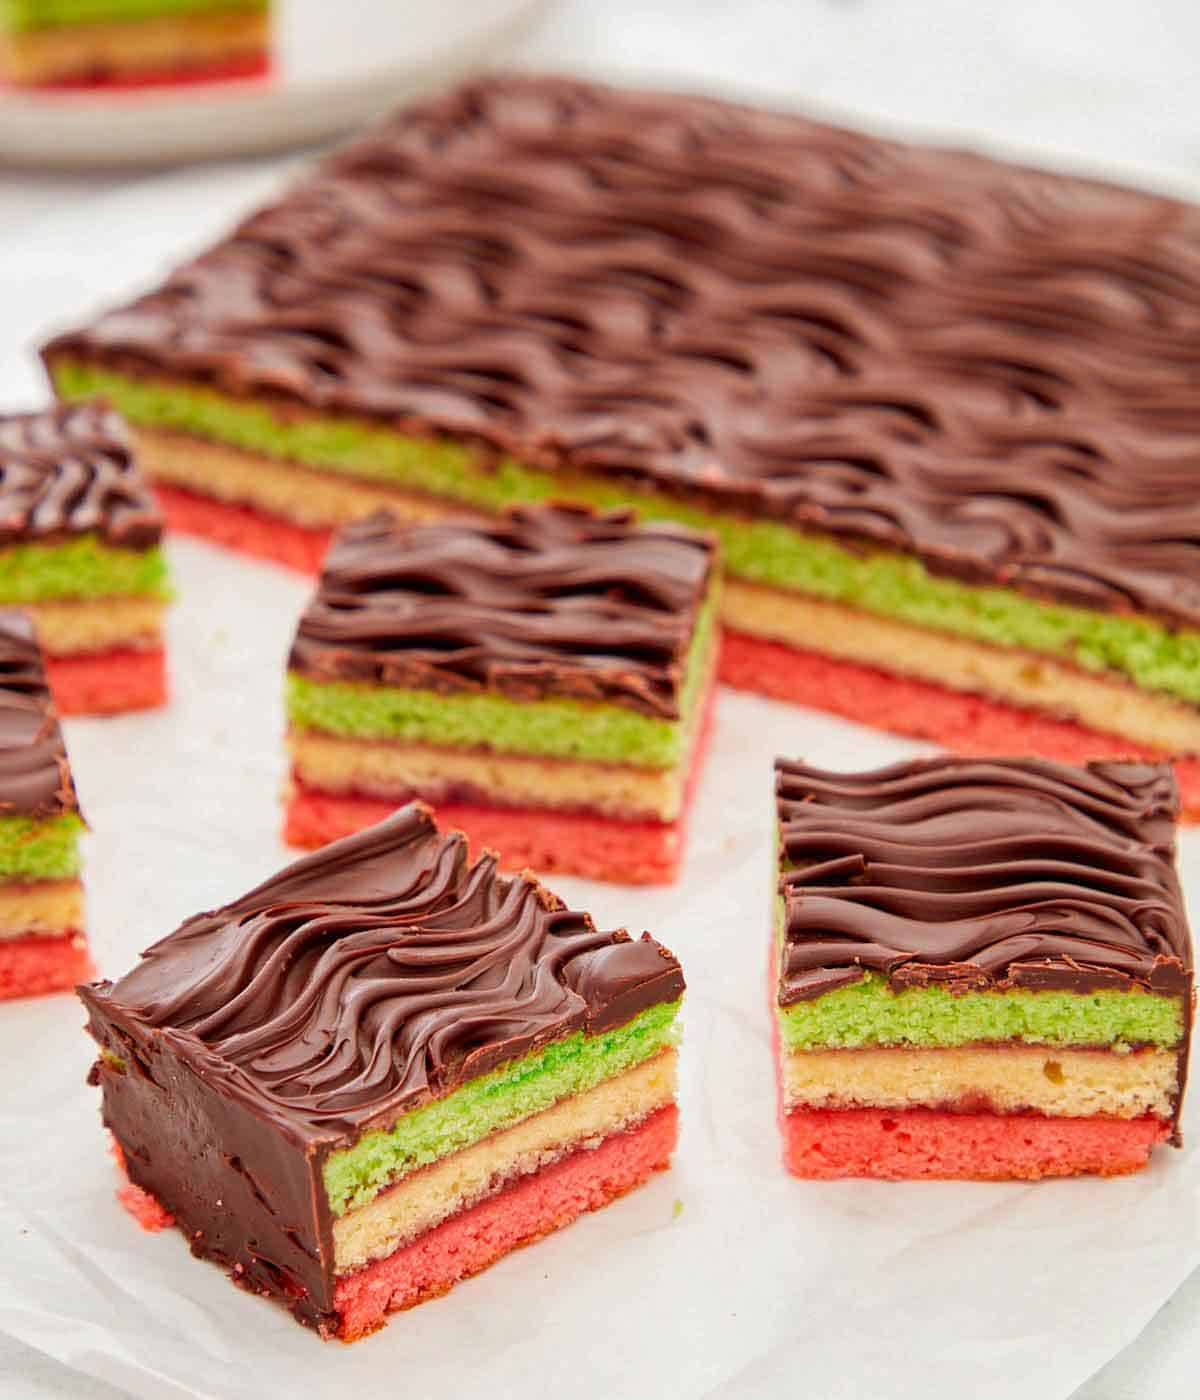 Multiple pieces of rainbow cookies cut from the main dessert in the background.